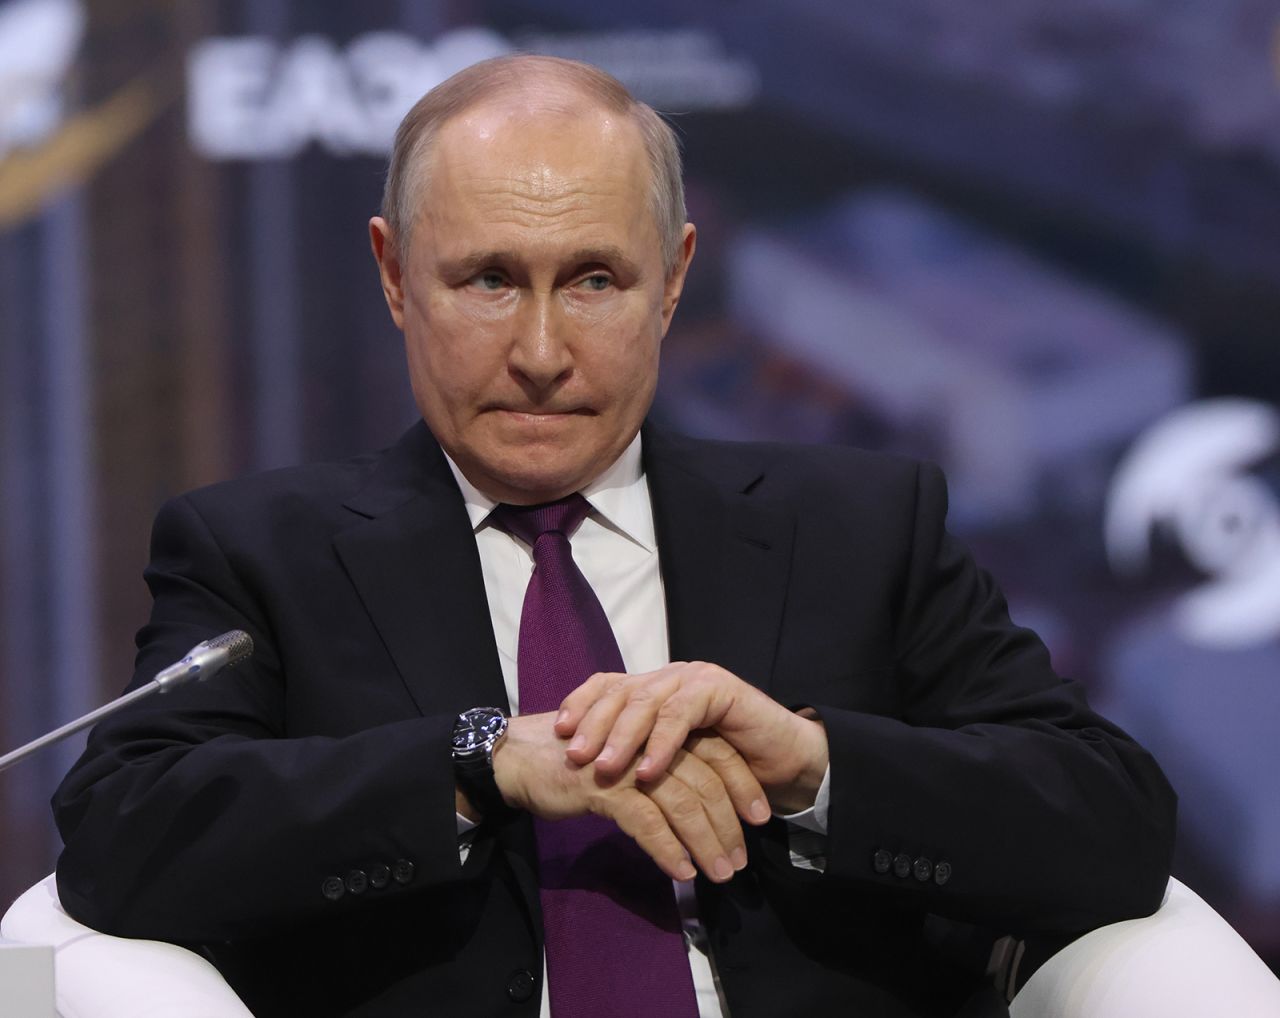 Vladimir Putin attends the Eurasian Economic Forum, in Moscow, Russia on May 24.